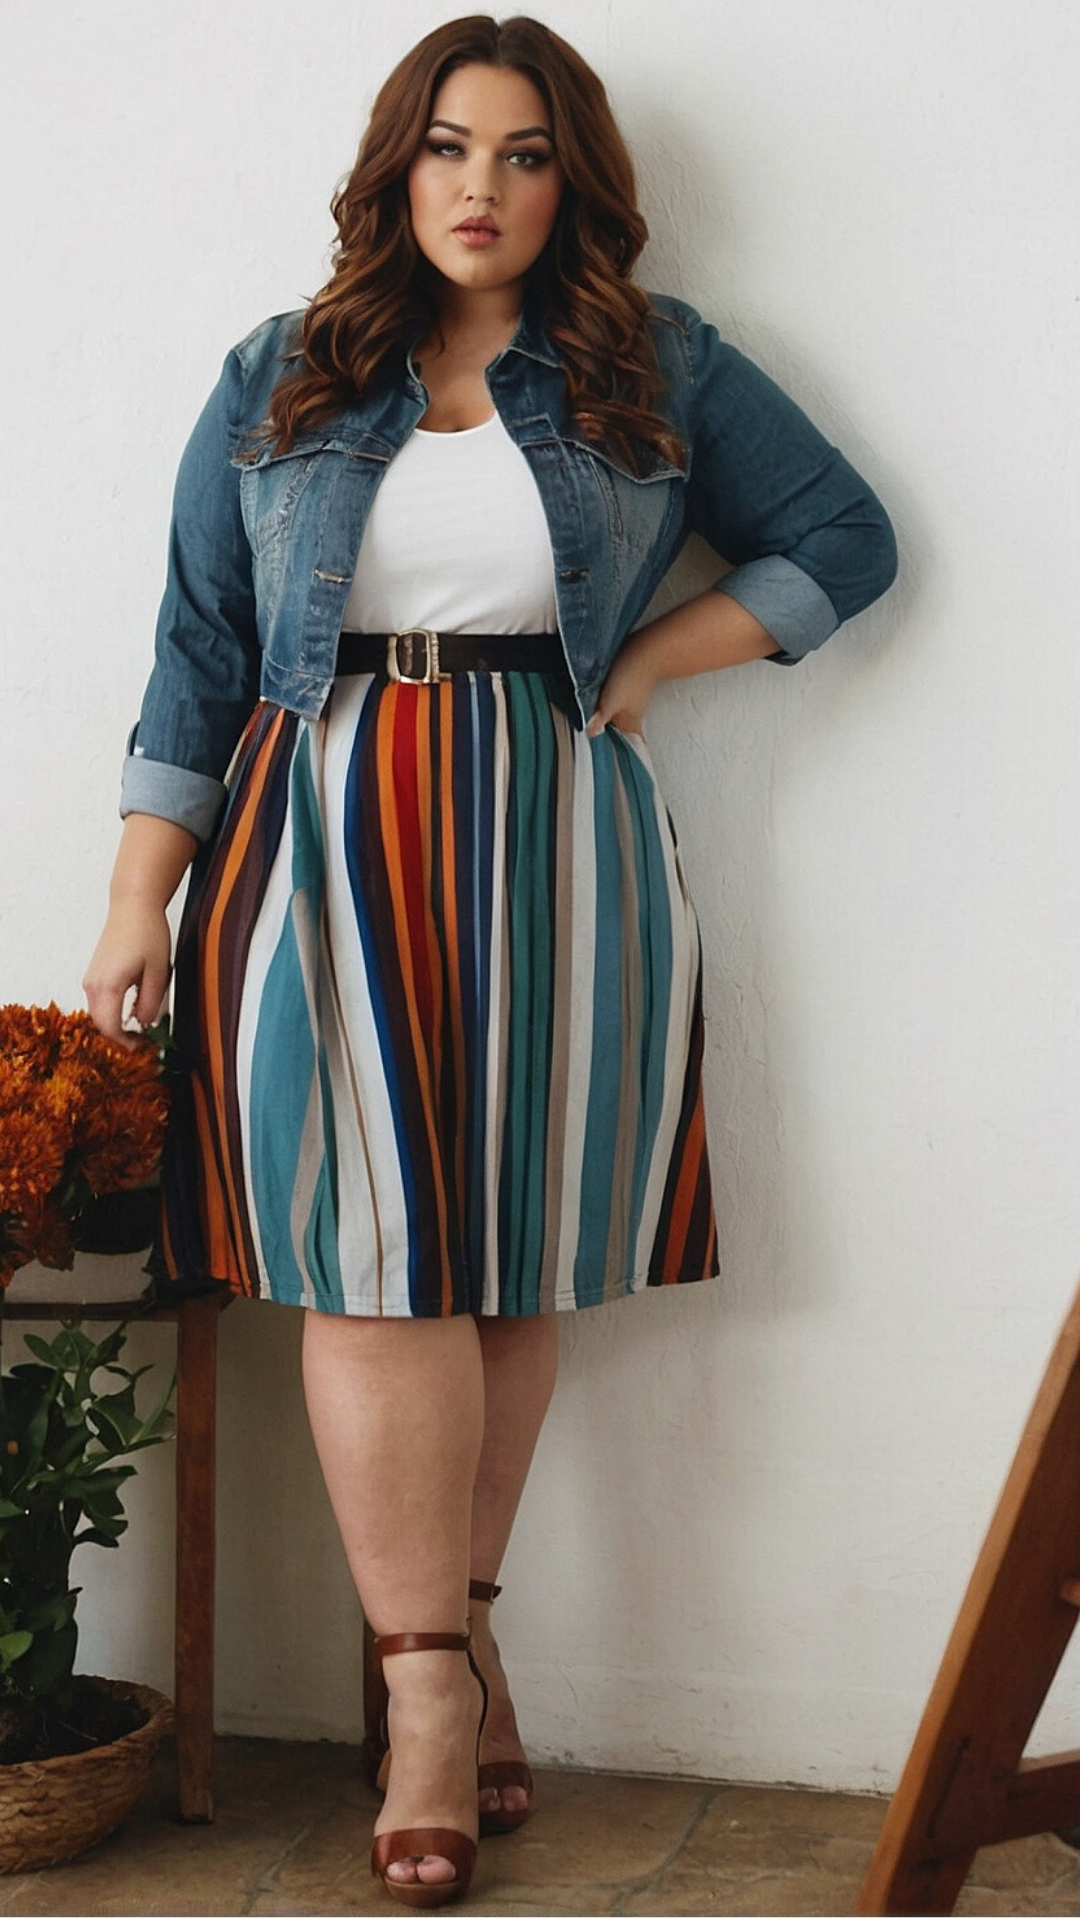 Adorable Plus Size Outfits for Autumn.